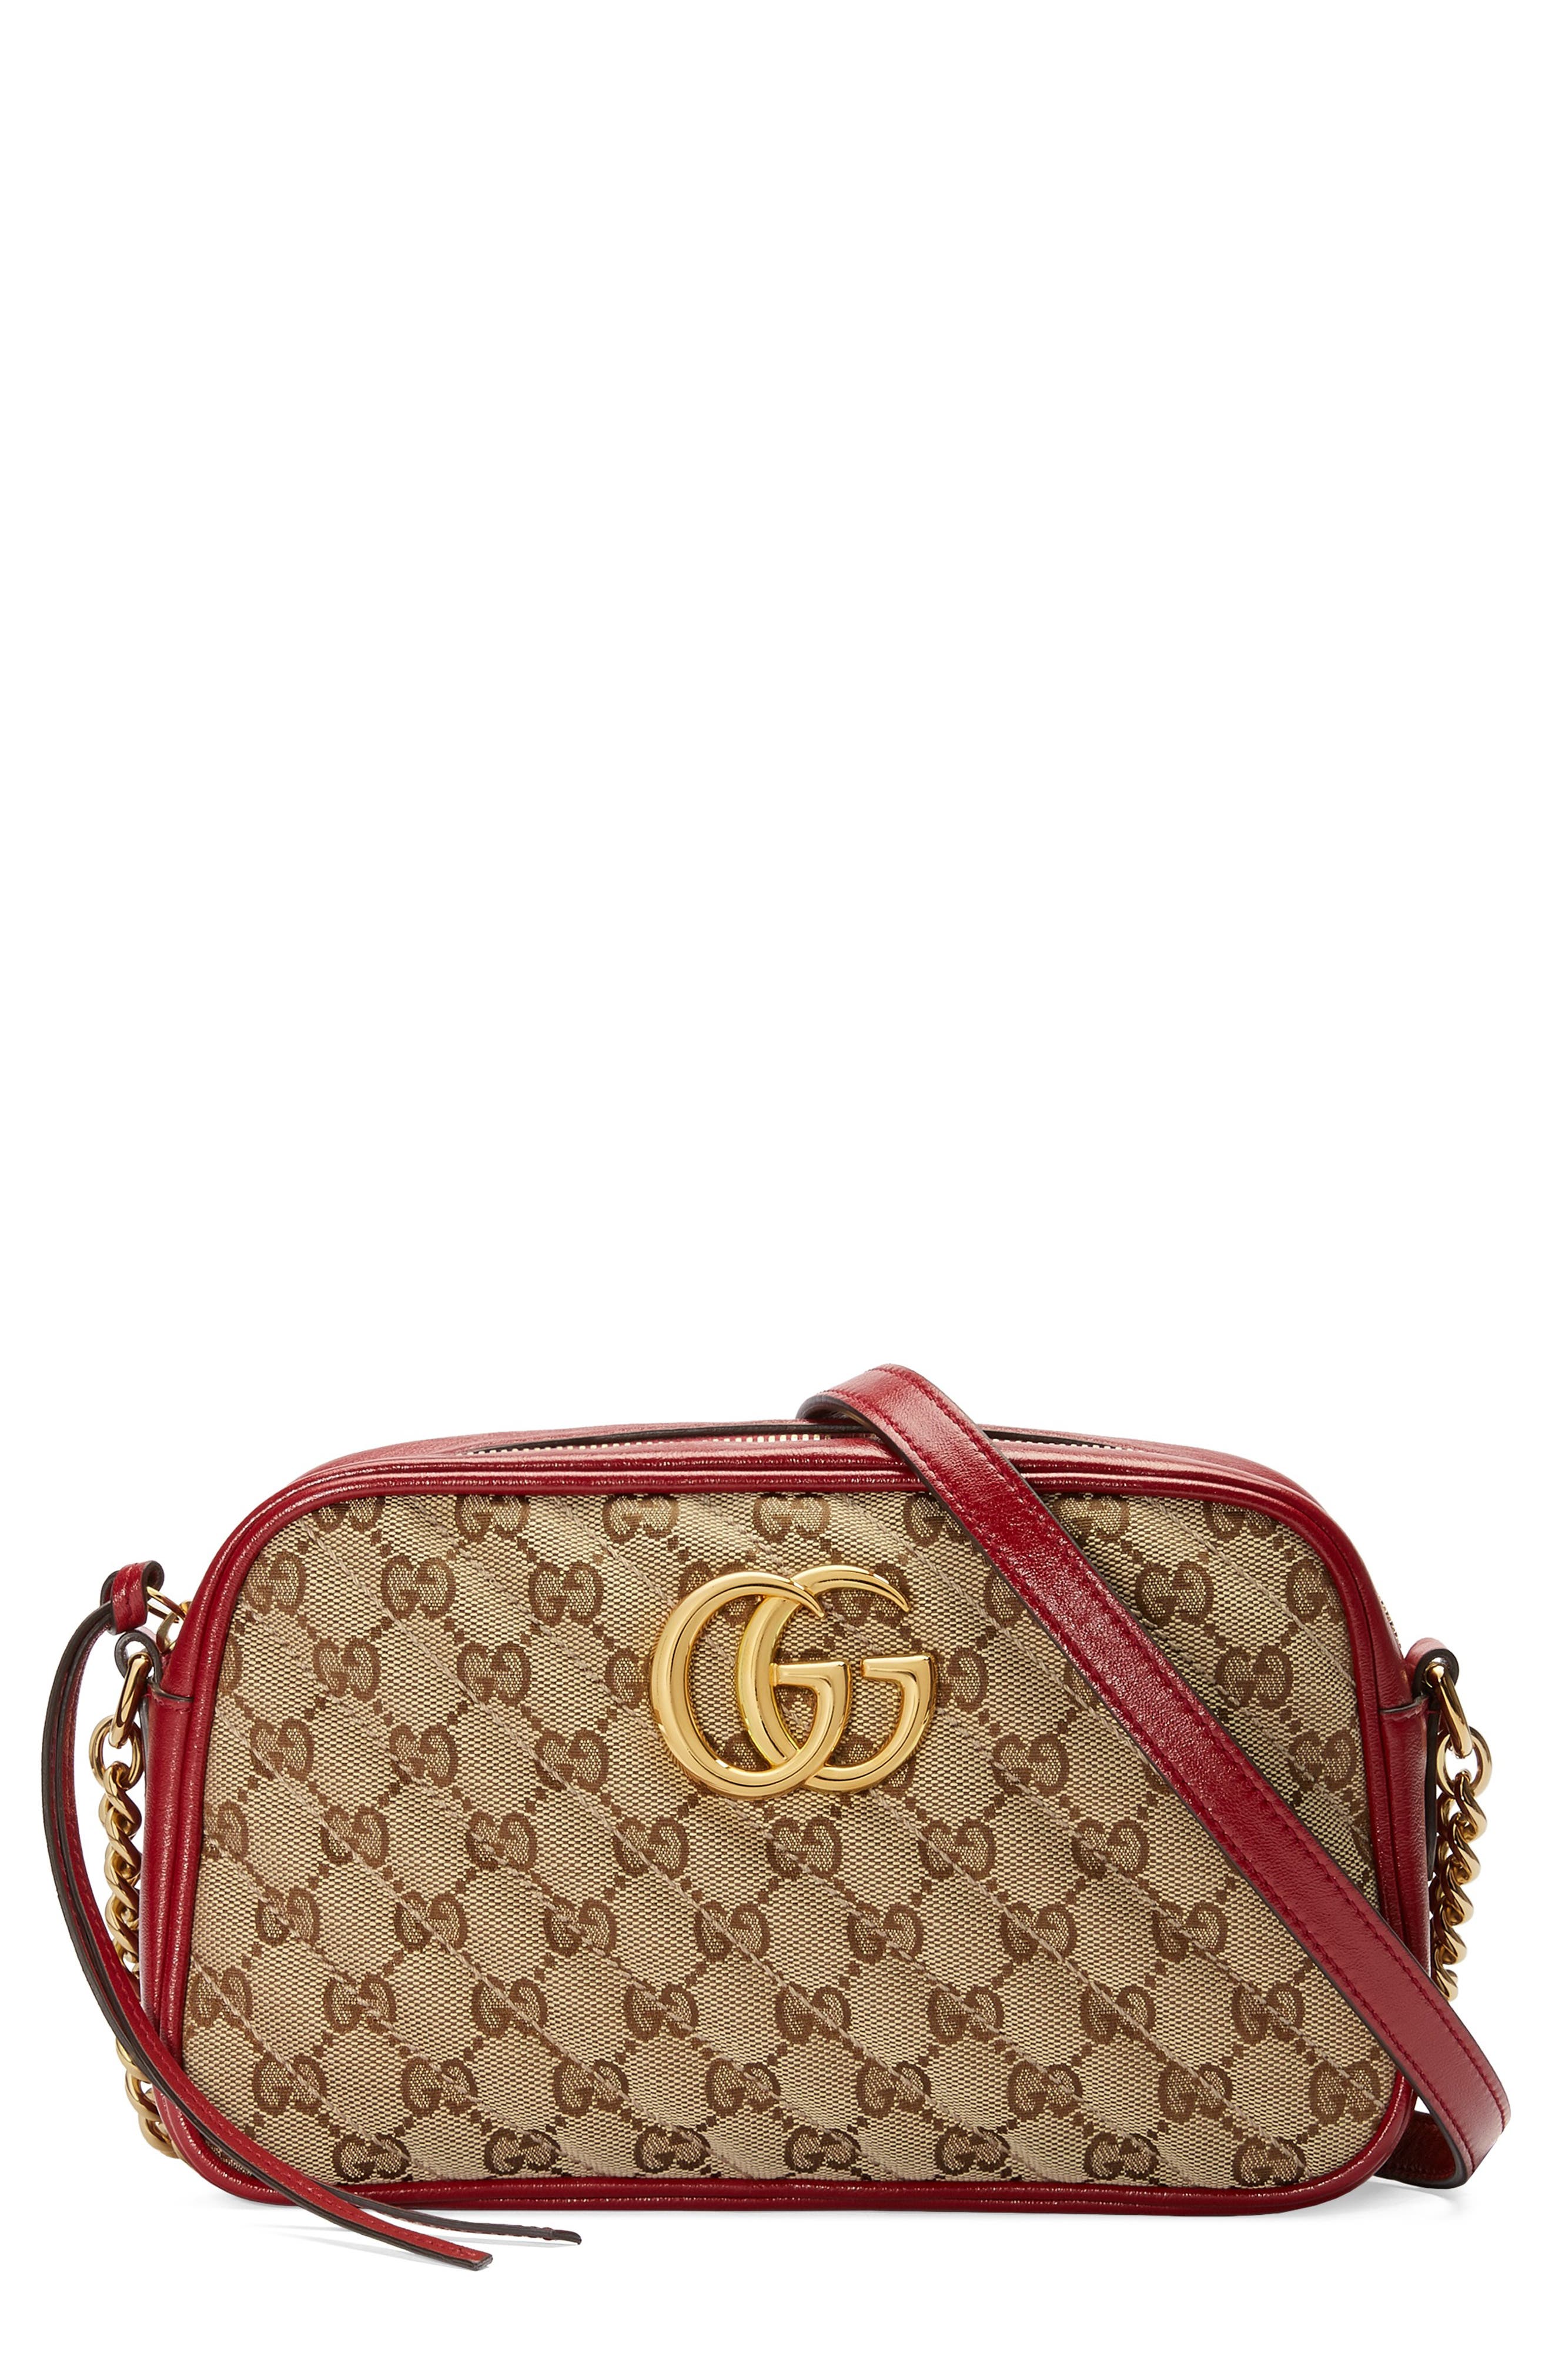 gucci marmont nordstrom